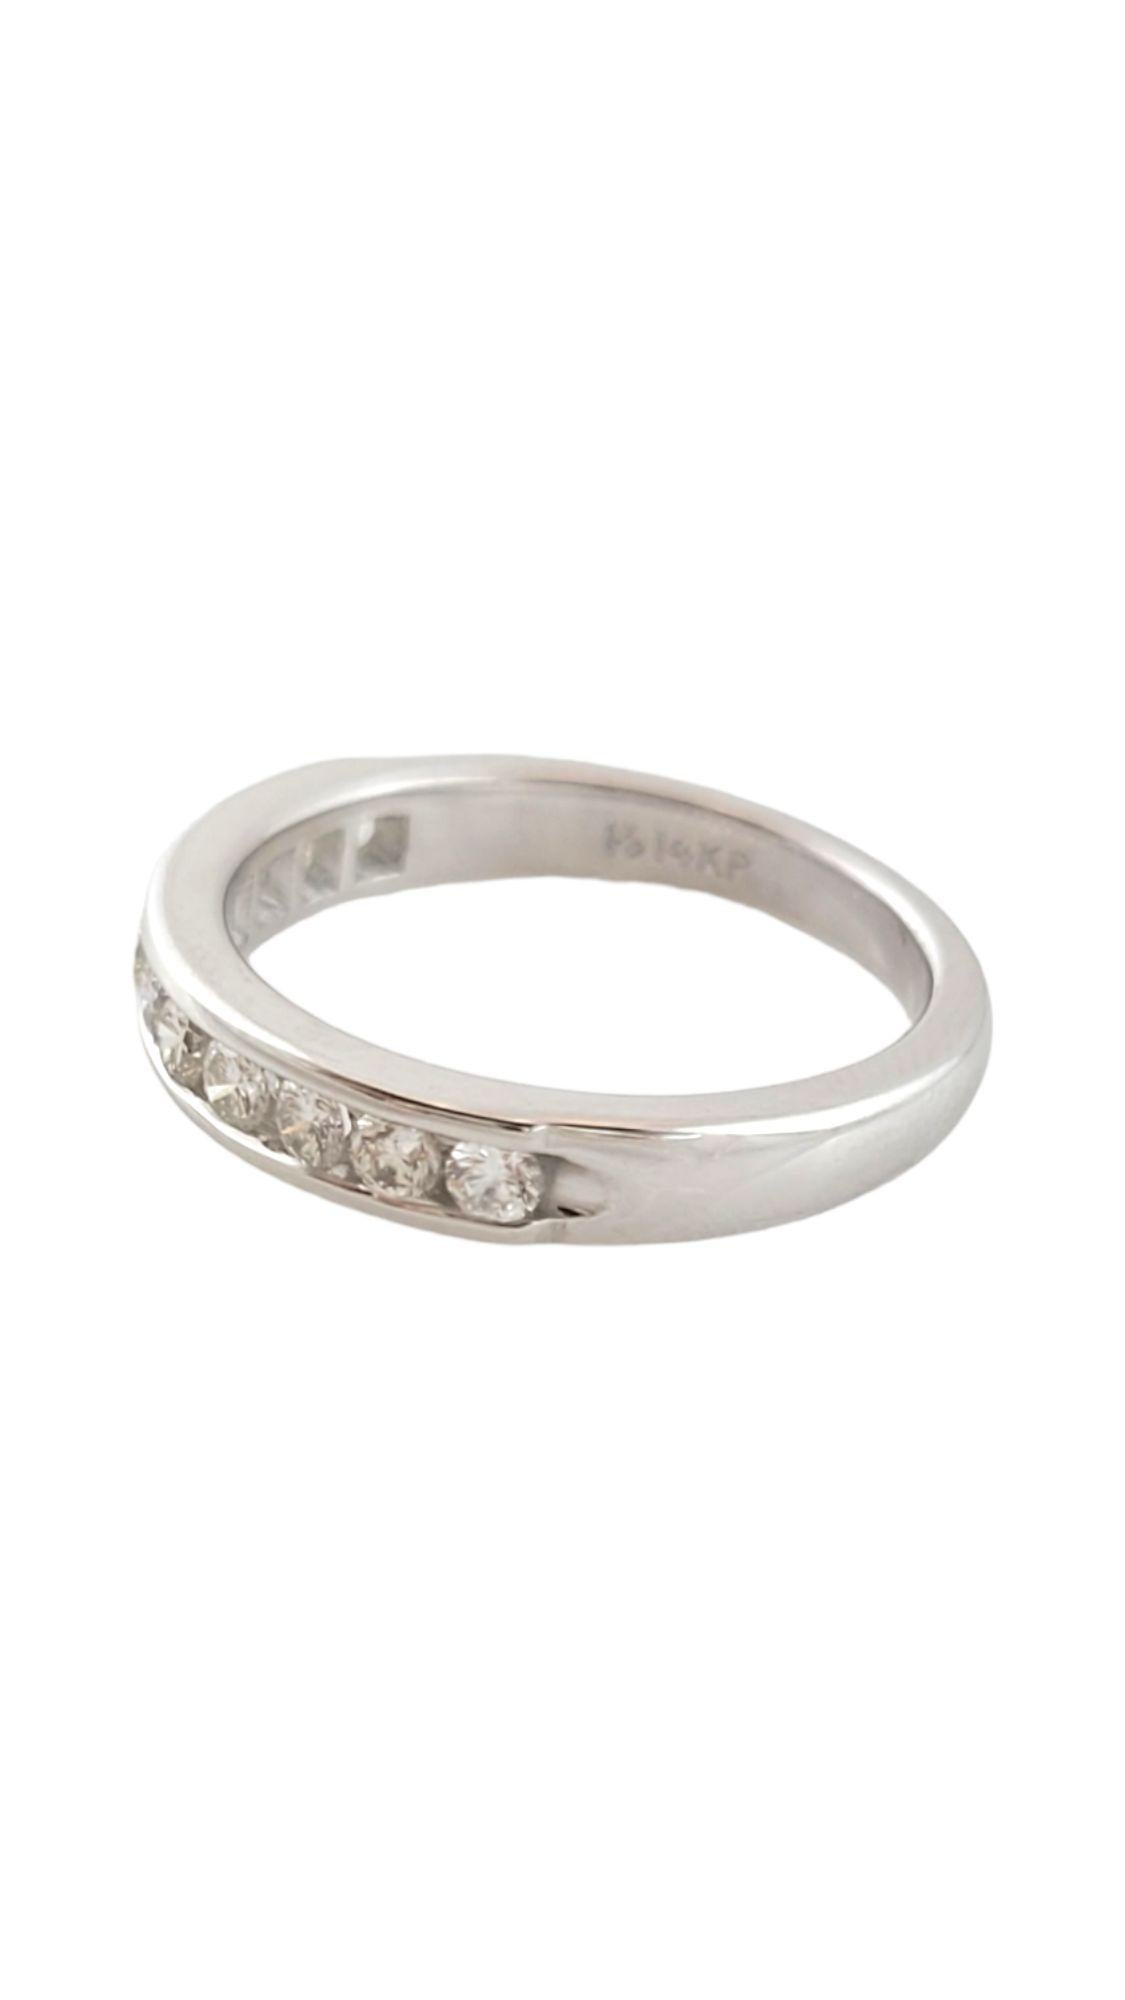 Gorgeous 14K white gold wedding band with 11 sparkling, round cut channel set diamonds!

Approximate total diamond weight: 0.44 cts

Diamond clarity: VS1-VS2

Diamond color: G-H

Shank: 2.6mm

Weight: 3.84 g/ 2.5 dwt

Hallmark: 14KP

Very good